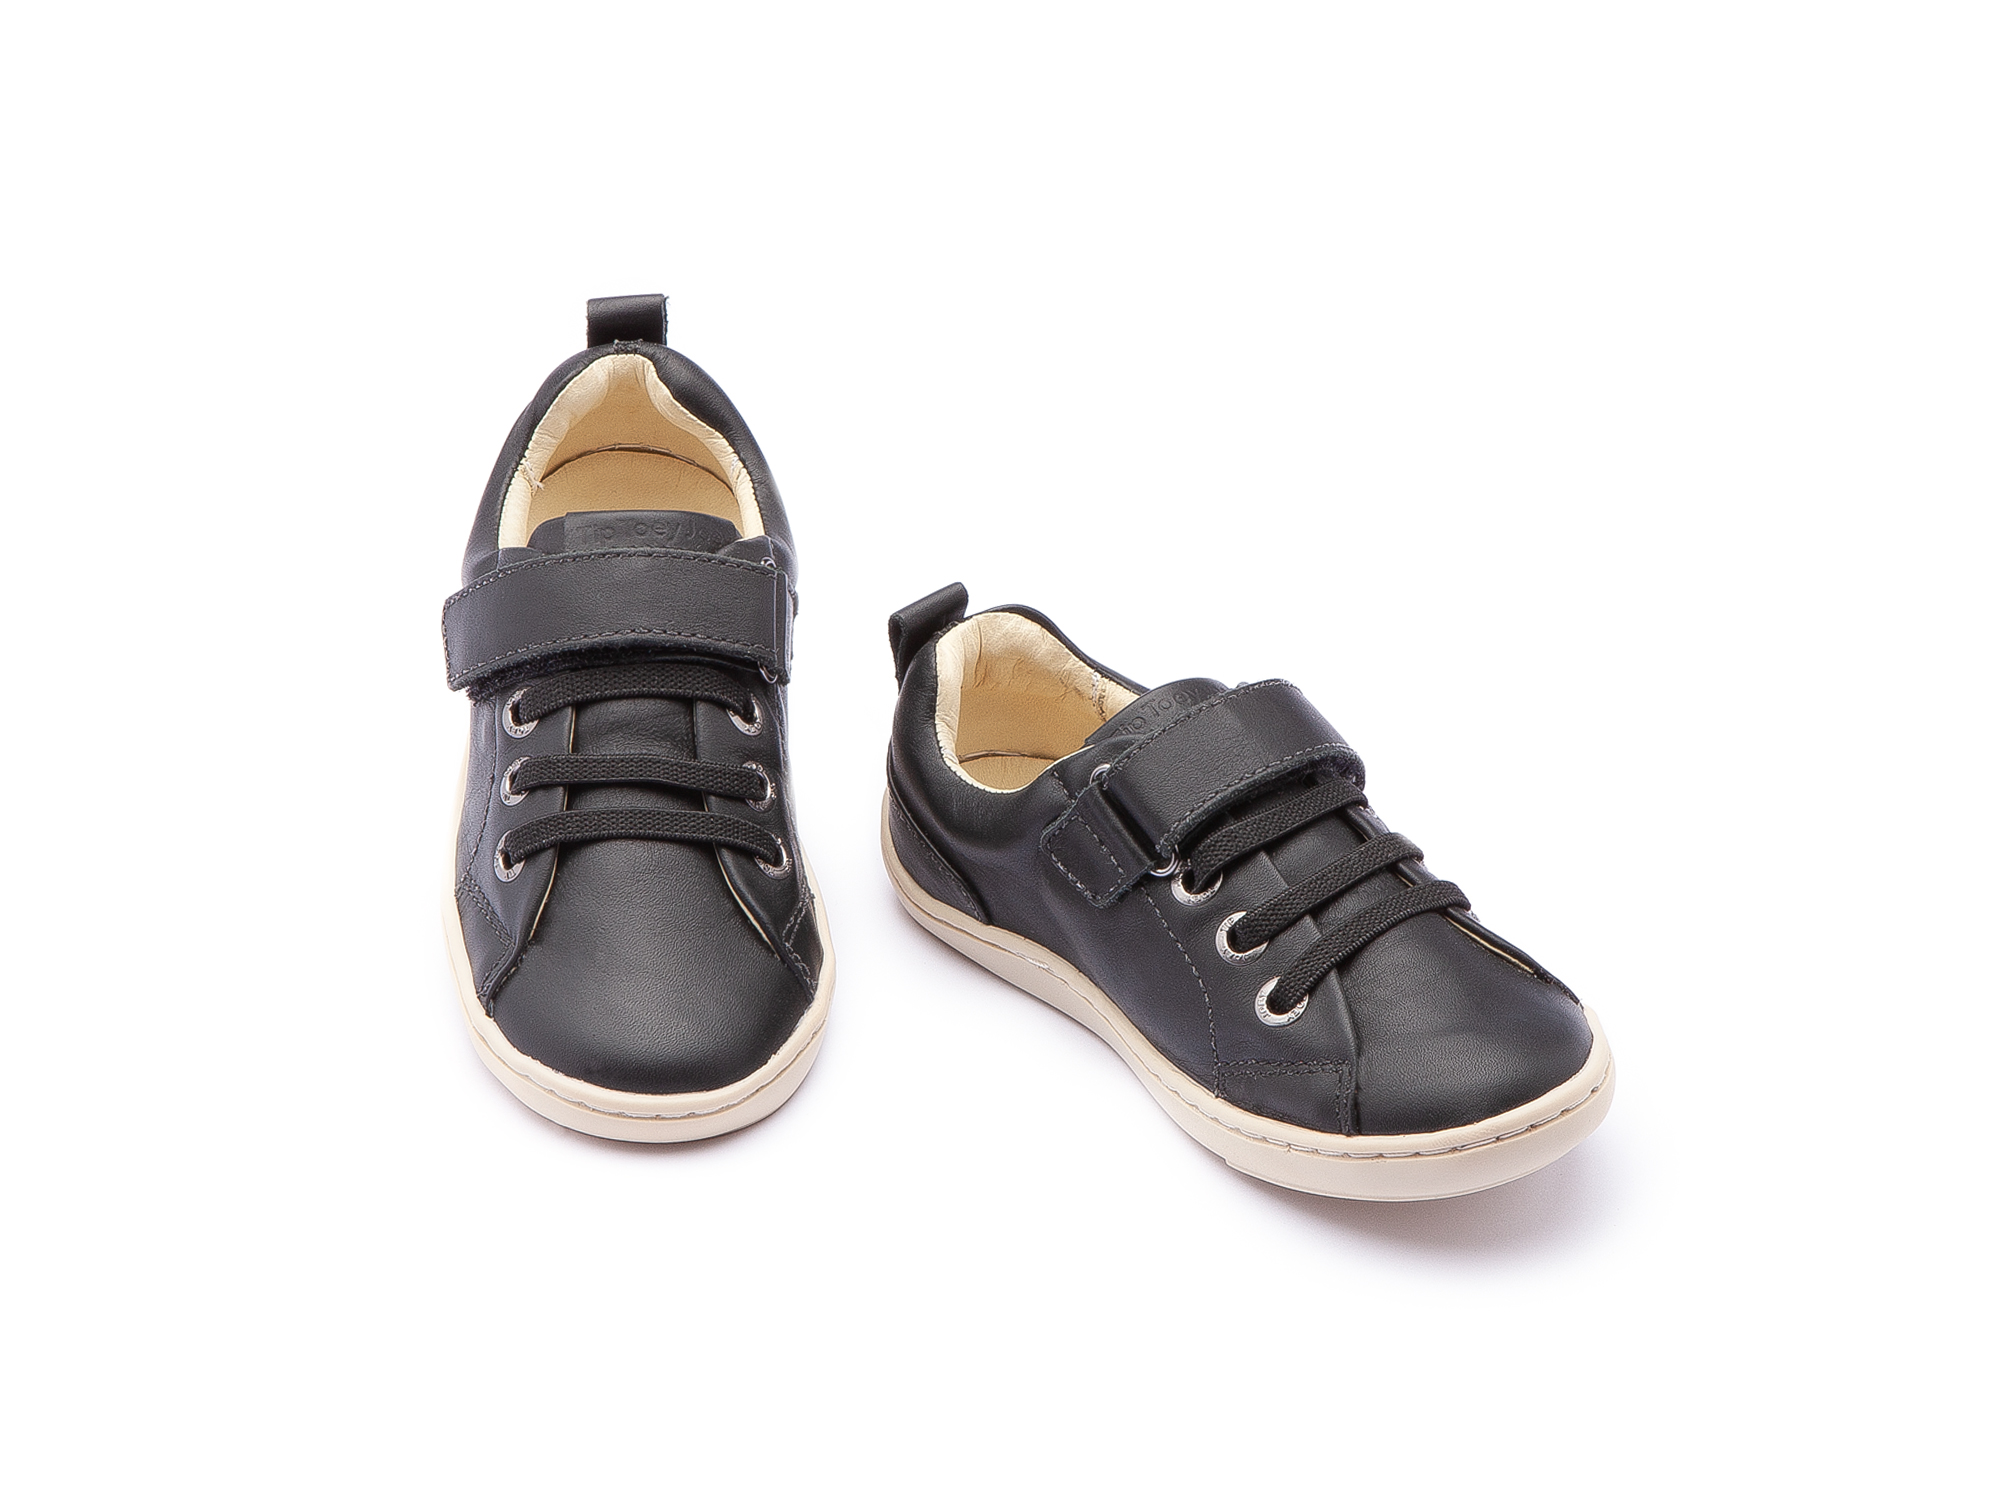 UP & GO Casual for Boys Little Grao | Tip Toey Joey - Australia - 1